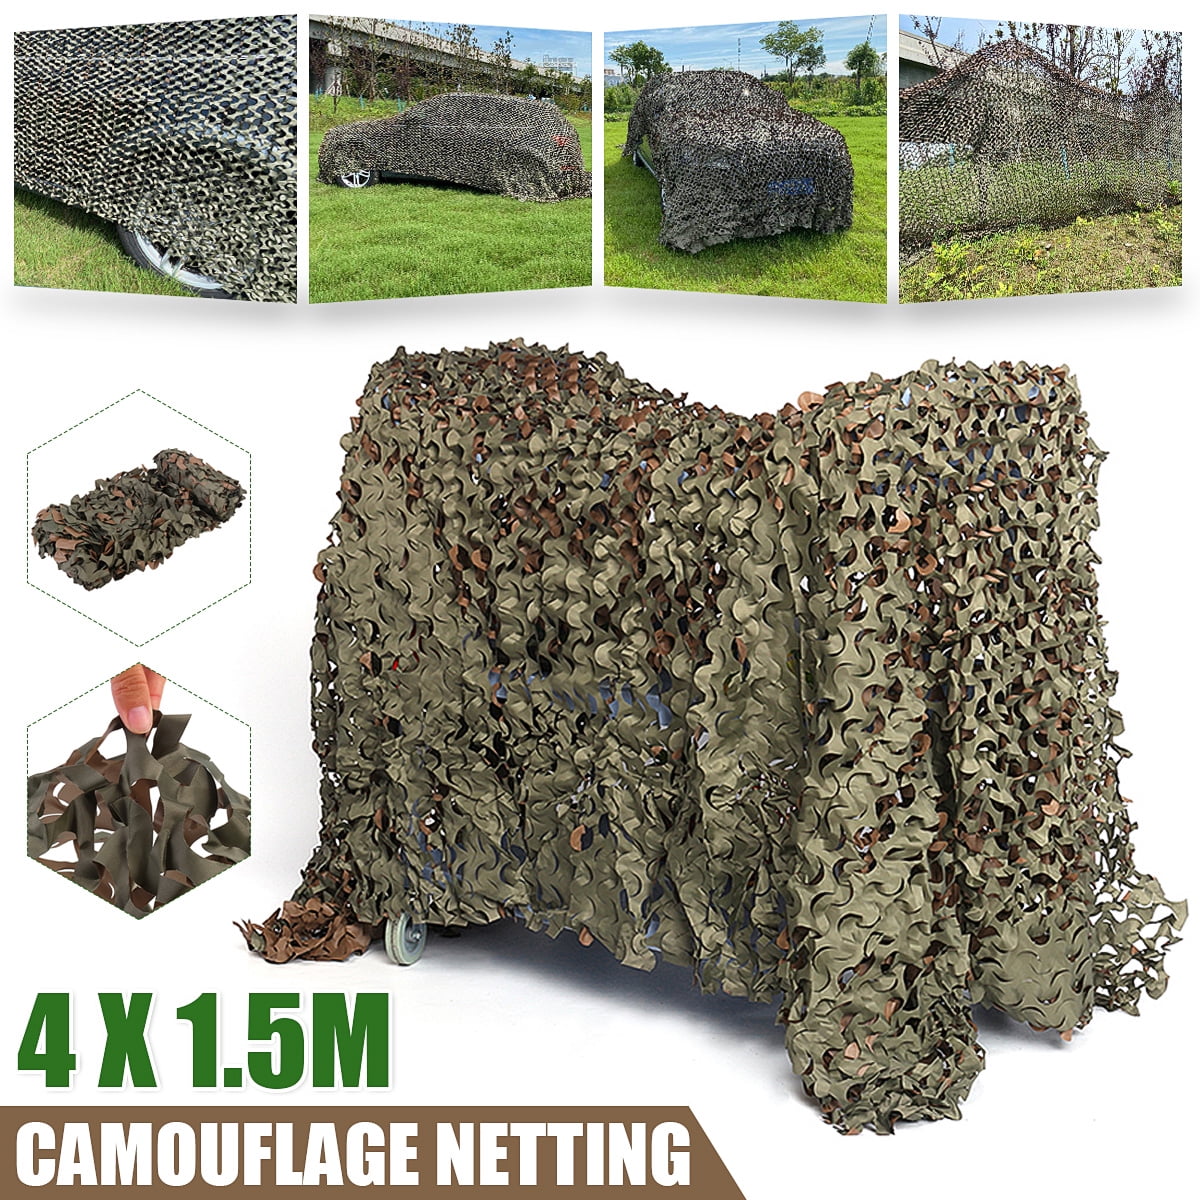 Camo Netting Camouflage Net Blinds Great for Sunshade Camping Shooting Hunting 